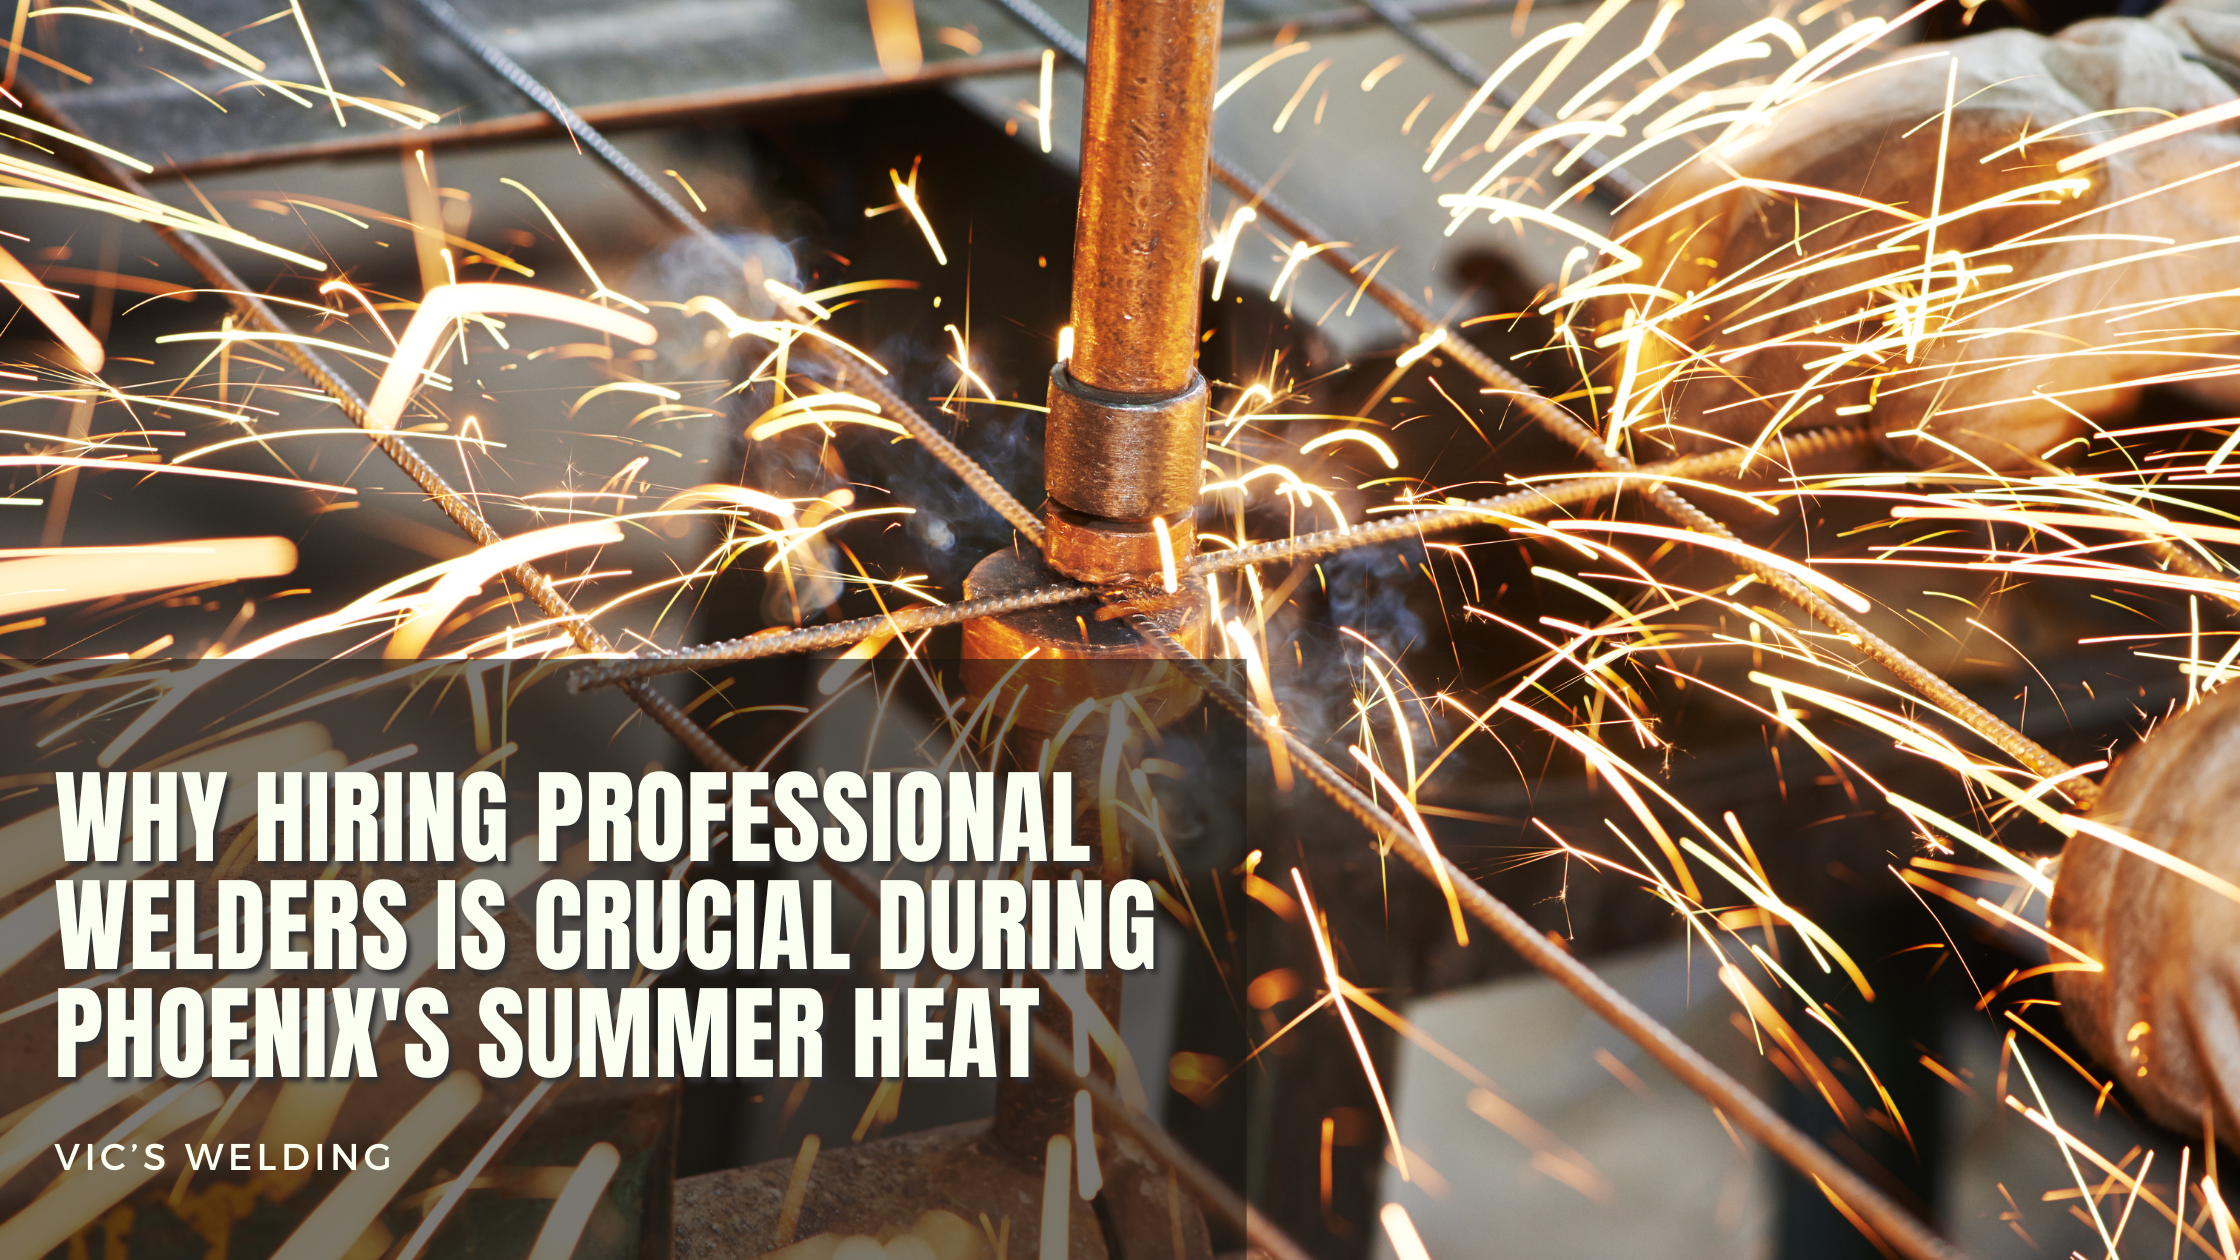 Why Hiring Professional Welders is Crucial During Phoenix's Summer Heat